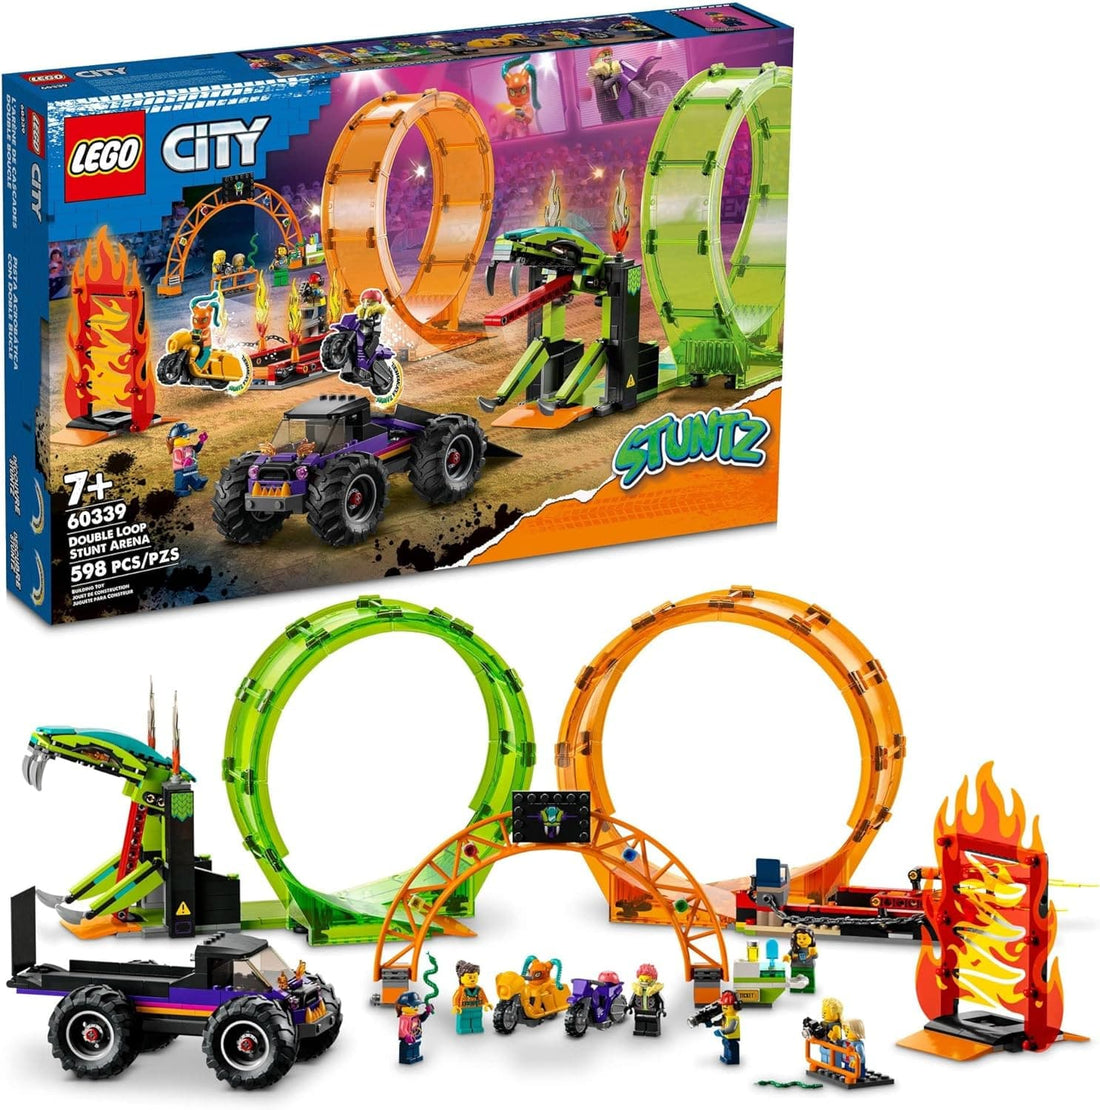 LEGO City Stuntz Double Loop Stunt Arena Monster Truck Playset with 2 Toy Motorcycles, Ramp, Wall of Flames, Ring of Fire, Snapping Snake Loop and 7 Minifigures - best price from Maltashopper.com 60339